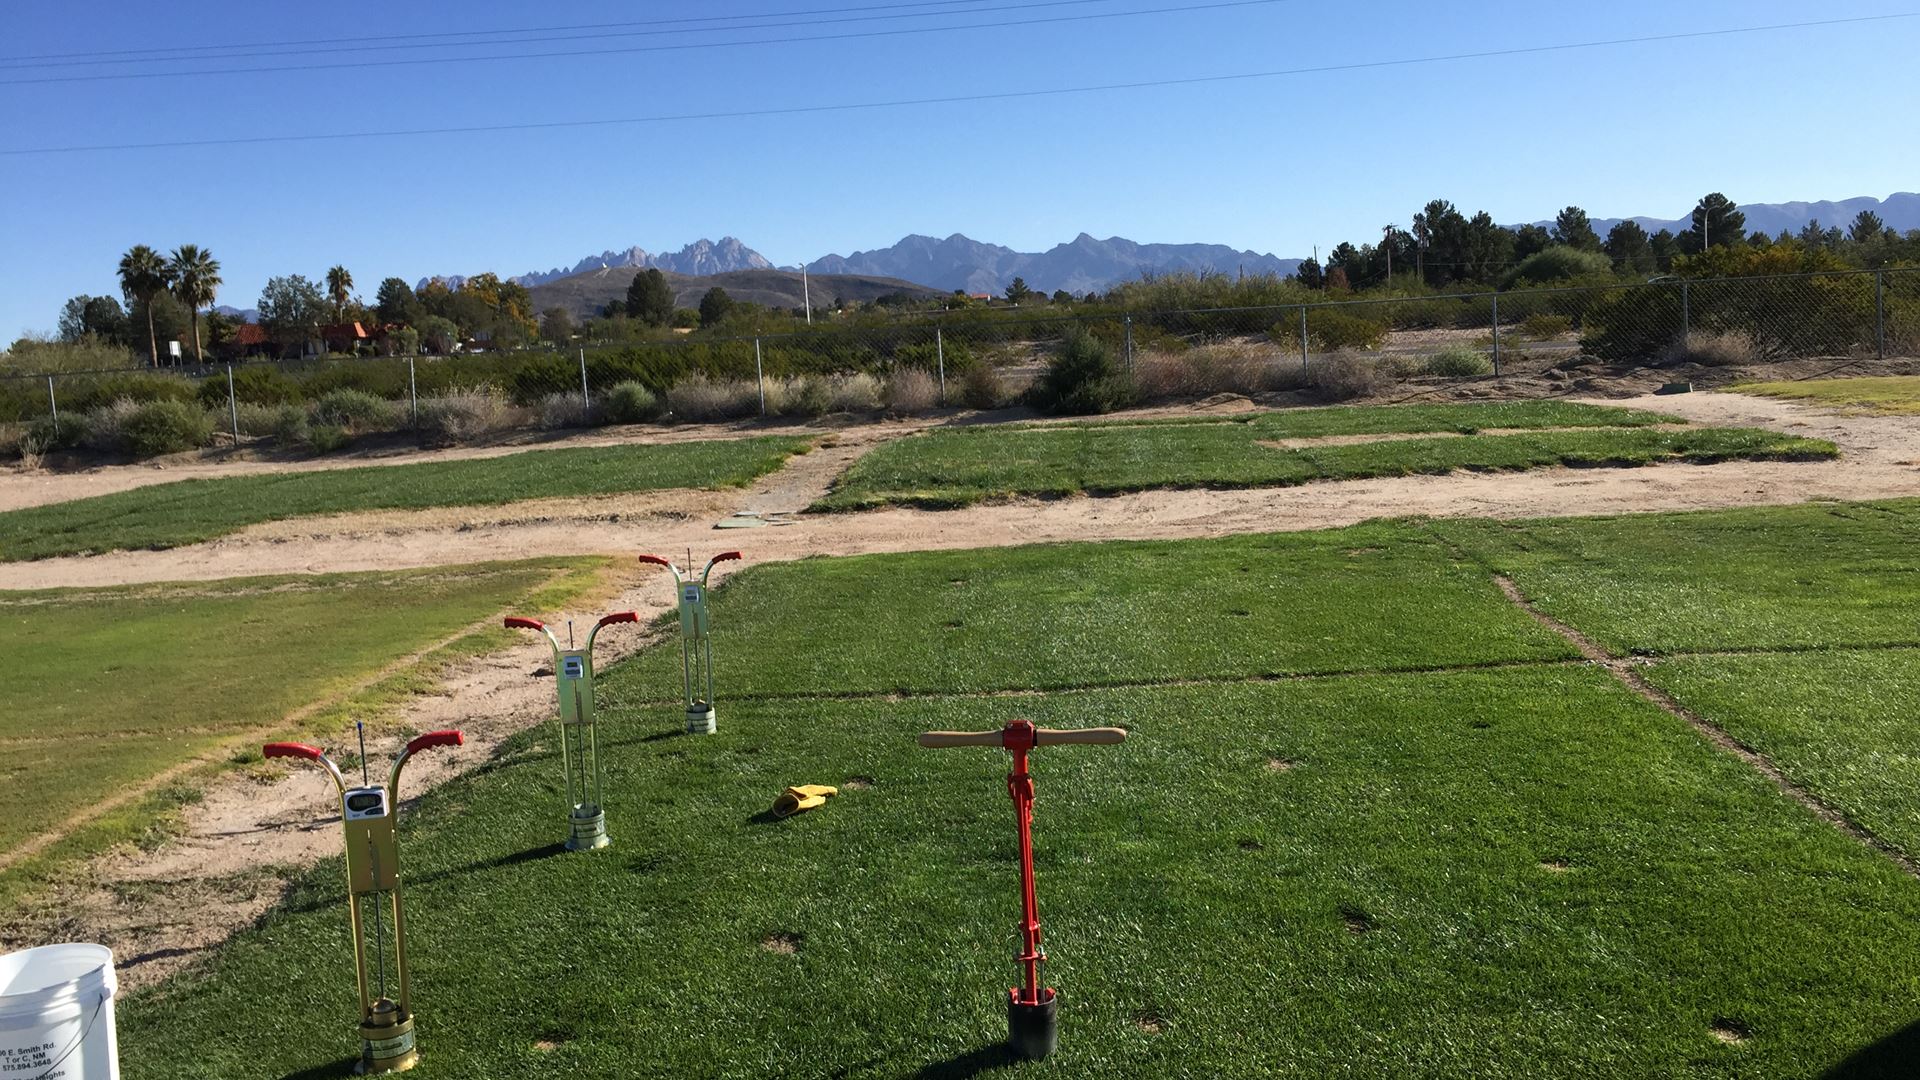 NMSU researchers look at surfactants for water conservation and their impact on soil health